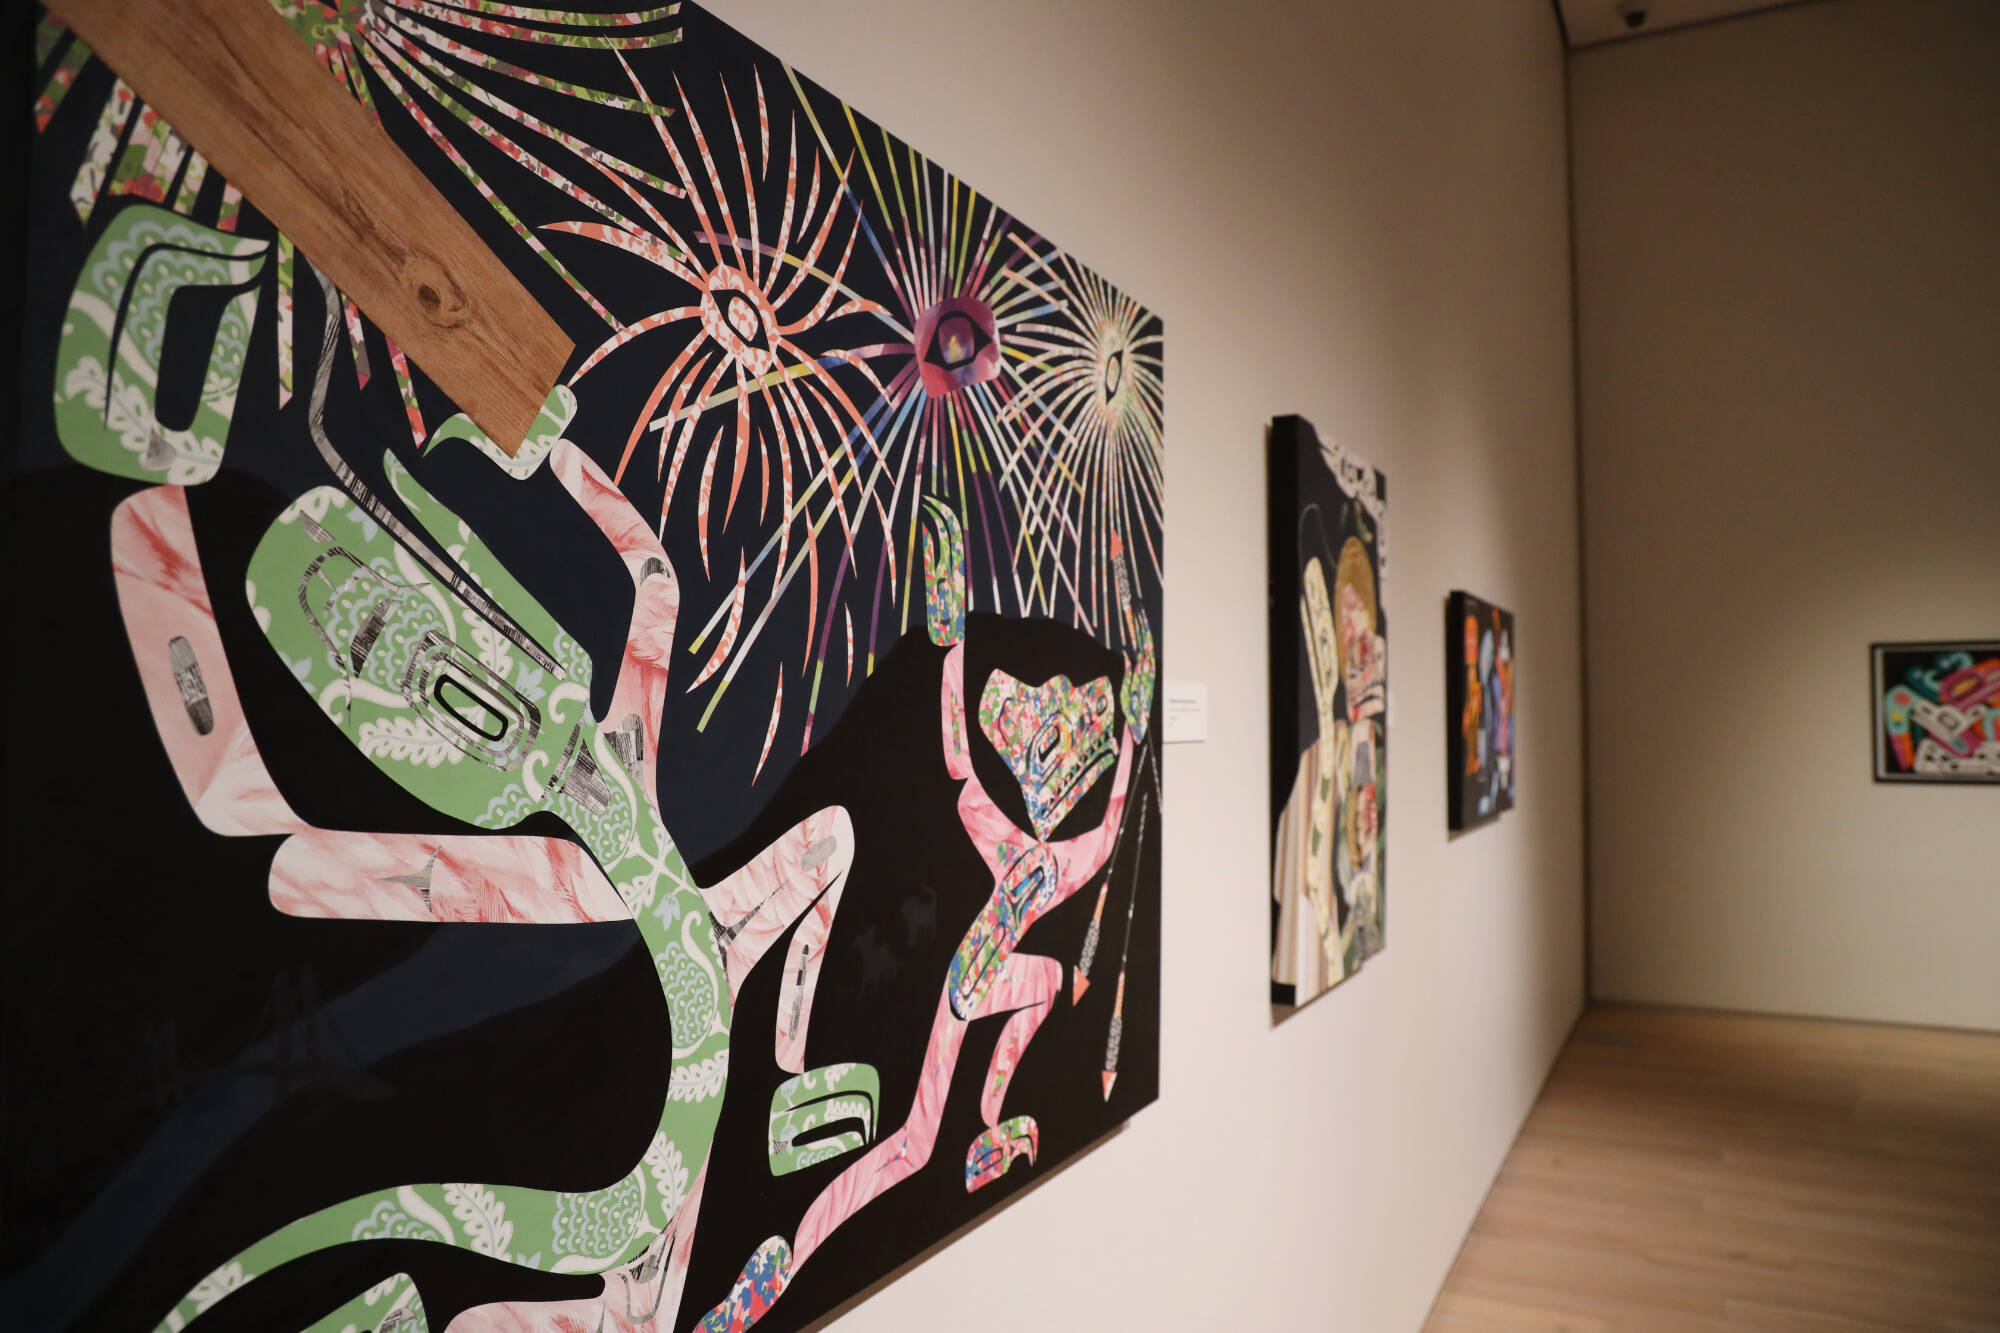 Tlingit artist Alison Bremner Nax̲shag̲eit’s solo exhibit, “Midnight at the Fireworks Stand,” at the Alaska State Museum is one of the many art displays to be included during the first Friday of the month event. (Clarise Larson / Juneau Empire)